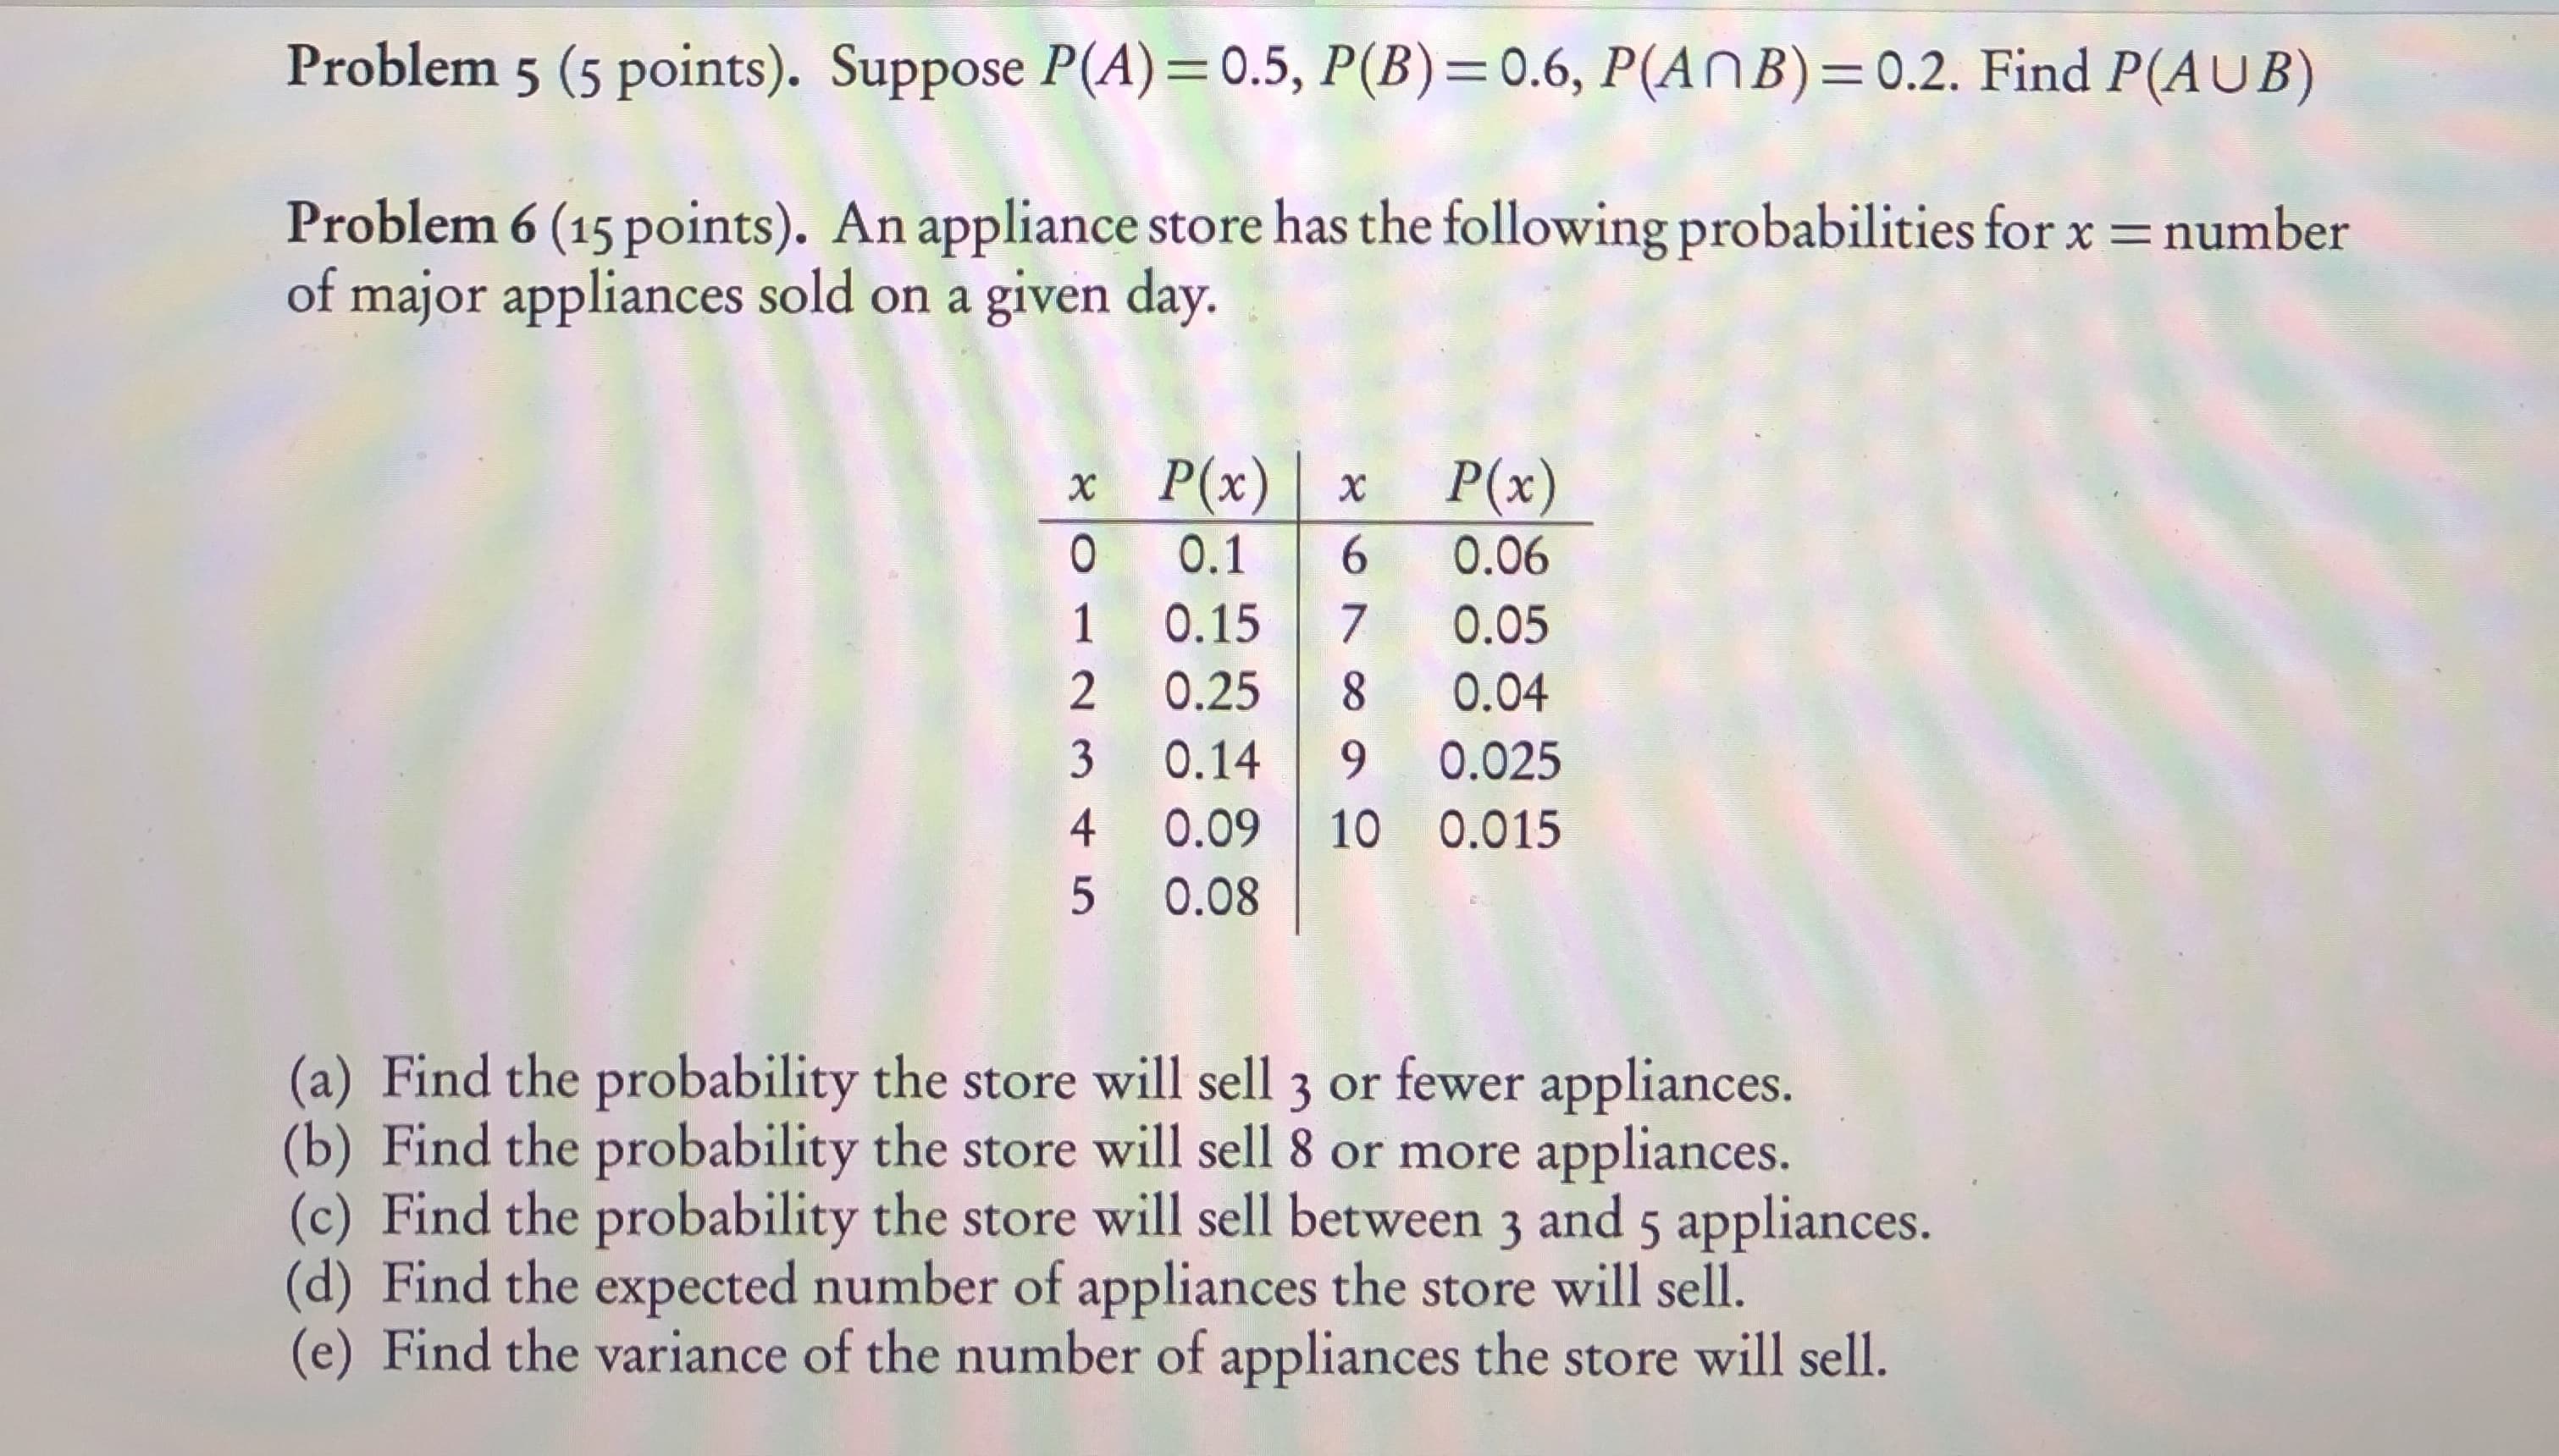 Problem 5 (5 points). Suppose P(A)=0.5, P(B)=0.6, P(ANB)=0.2. Find P(AUB)
%3D
Problem 6 (15 points). An appliance store has the following probabilities for x = number
of major appliances sold on a given day.
x P(x)
6.
1 0.15
0.25 8
P(x)
0.1
0.06
0.05
0.04
3
0.14
9.
0.025
4 0.09 10 0.015
5 0.08
(a) Find the probability the store will sell 3 or fewer appliances.
(b) Find the probability the store will sell 8 or more appliances.
(c) Find the probability the store will sell between 3 and 5 appliances.
(d) Find the expected number of appliances the store will sell.
(e) Find the variance of the number of appliances the store will sell.
